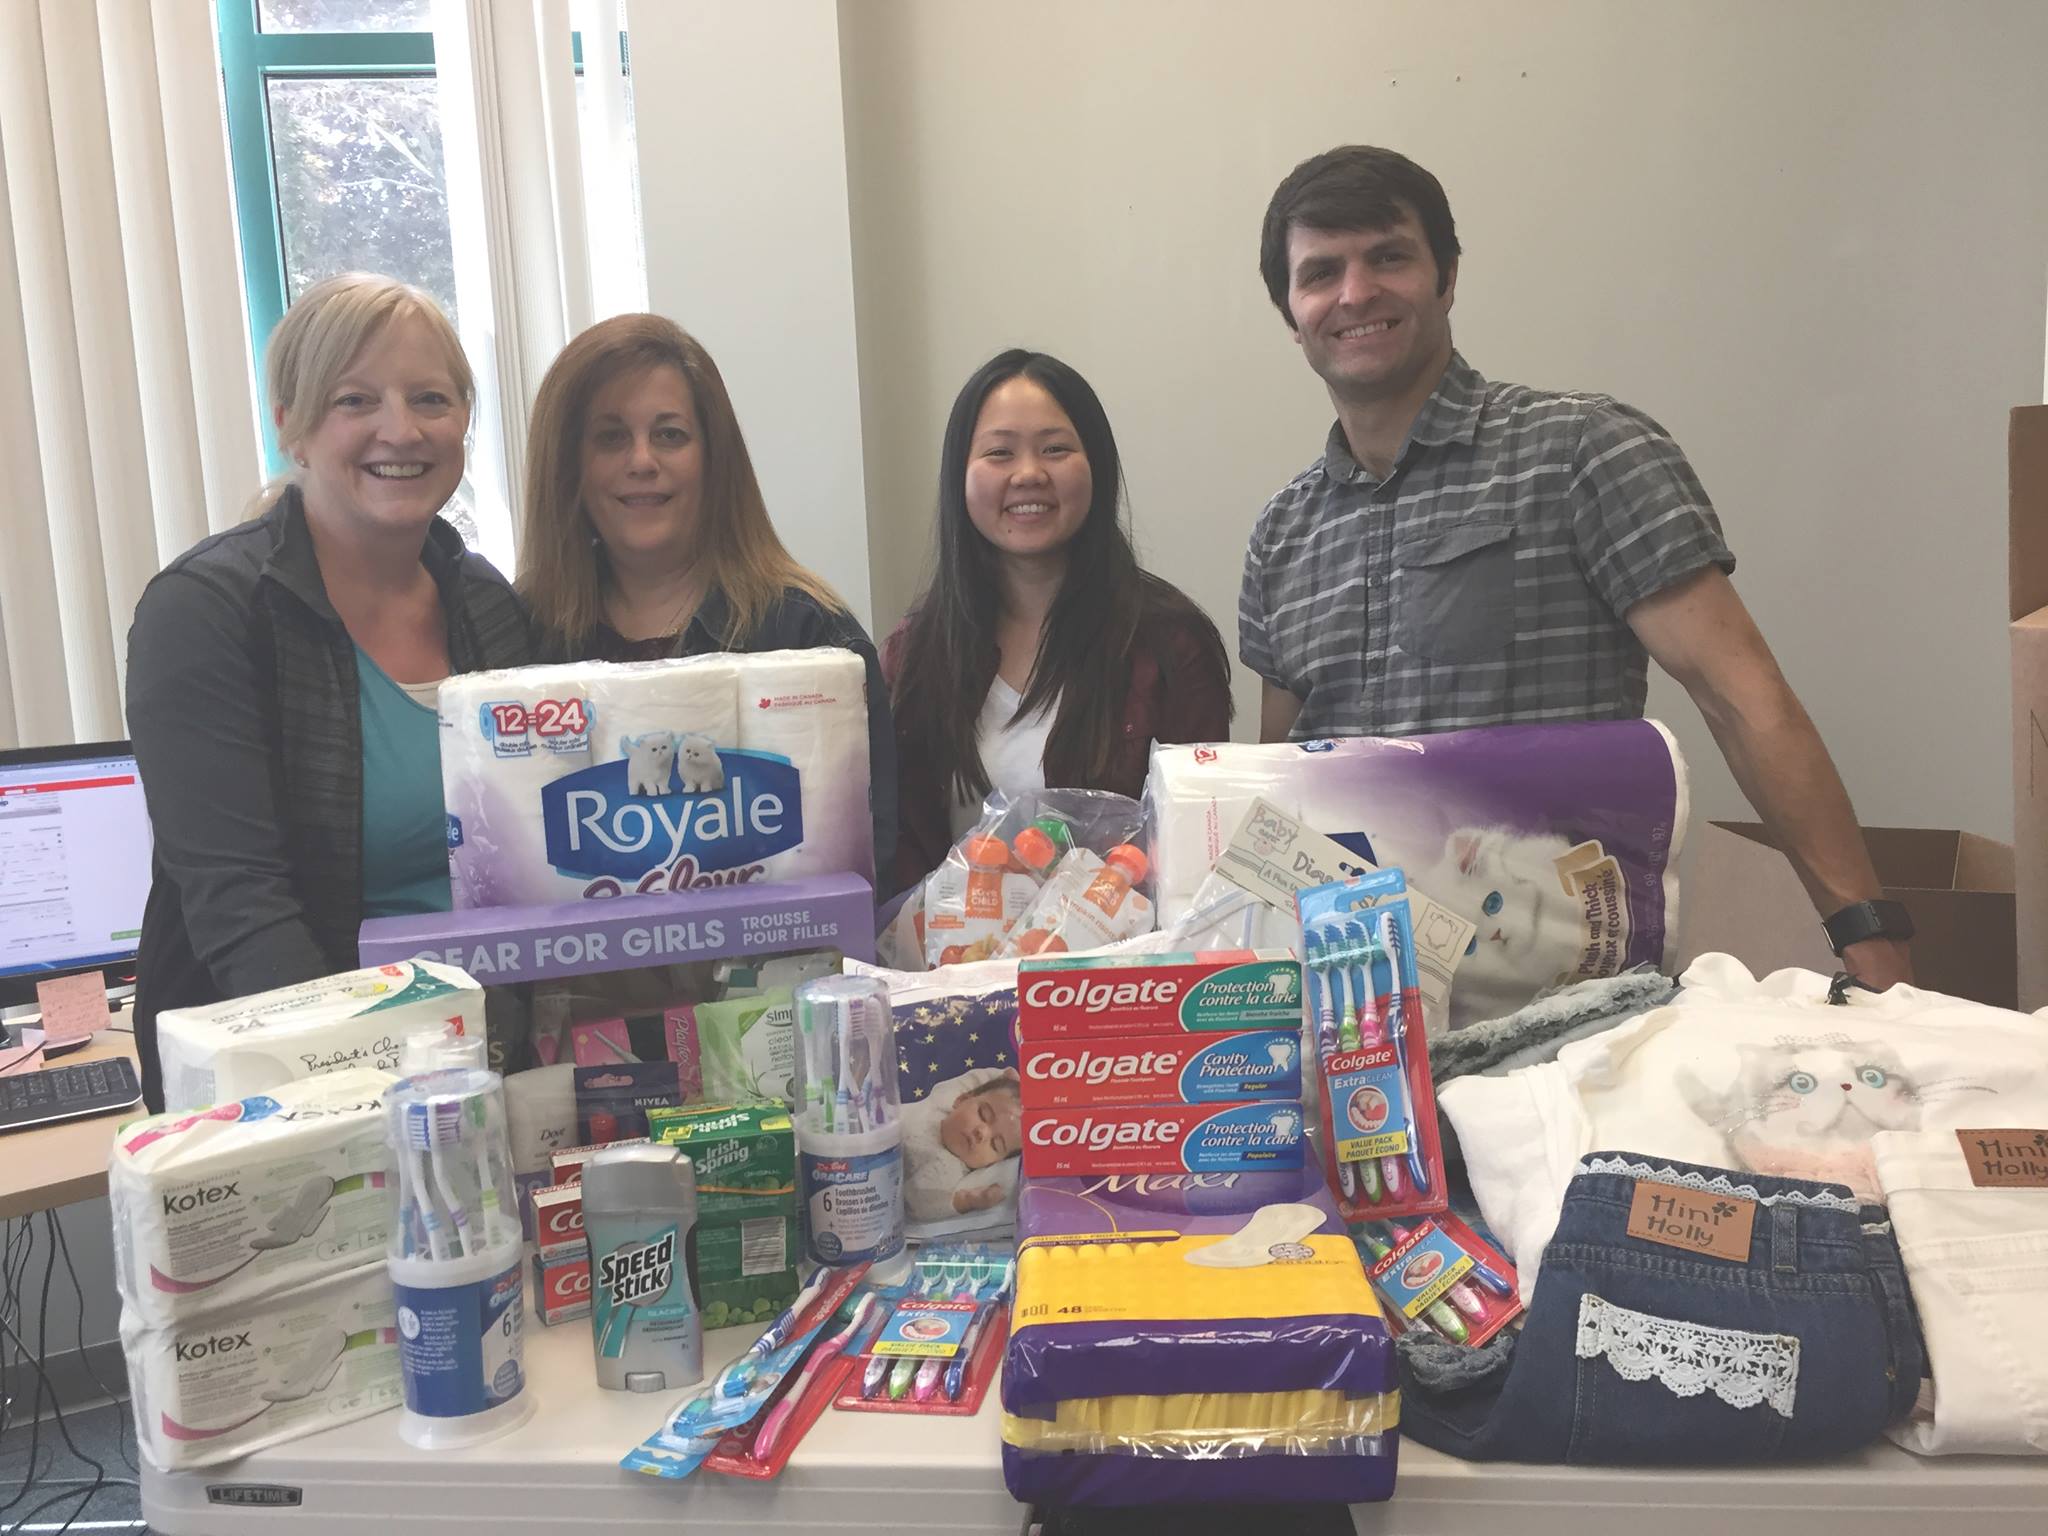 Staff in front of table with donated products